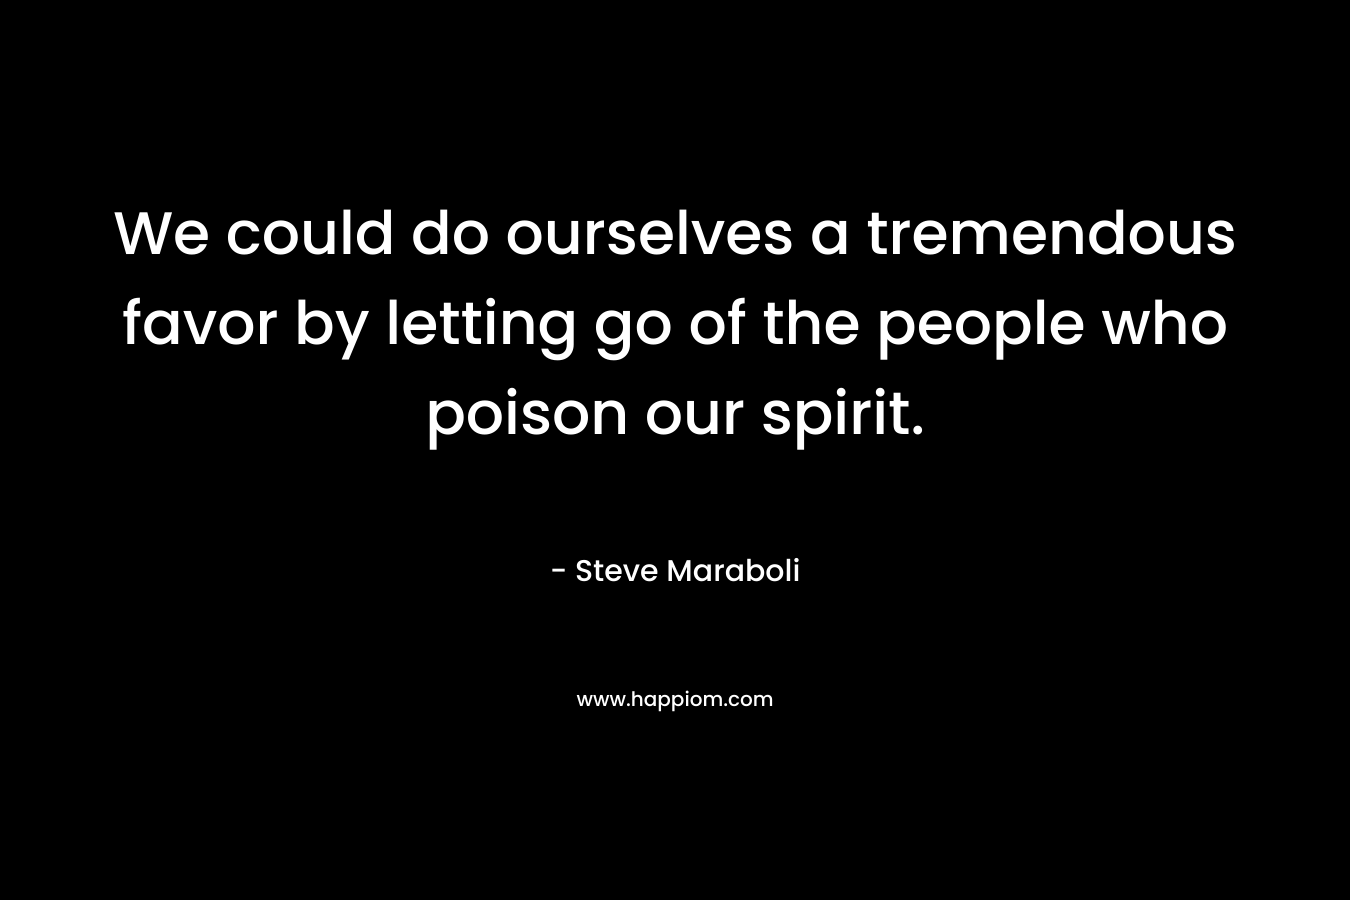 We could do ourselves a tremendous favor by letting go of the people who poison our spirit.